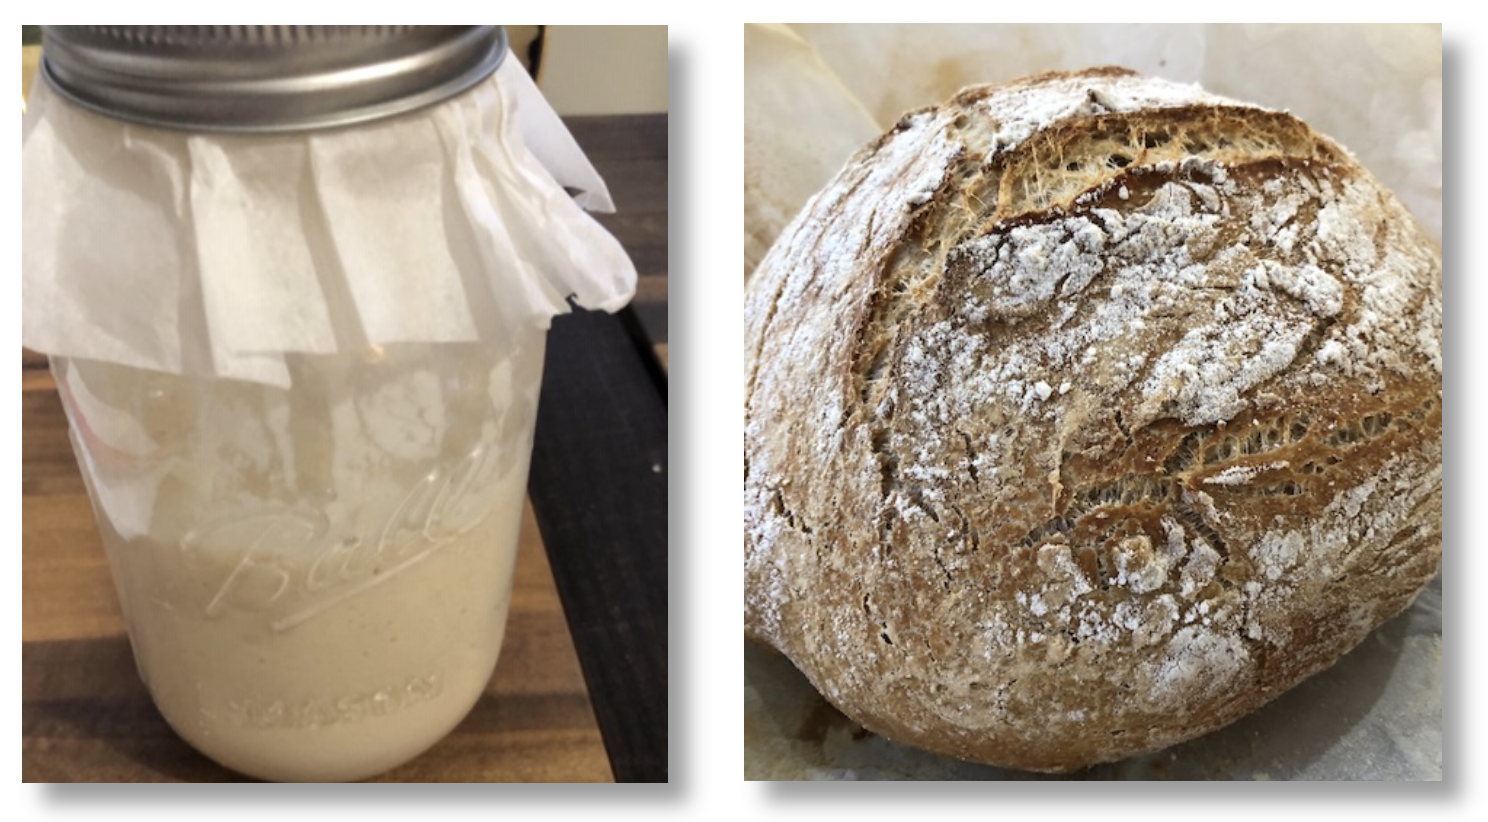 Sourdough starter and my best loaf of sourdough bread.